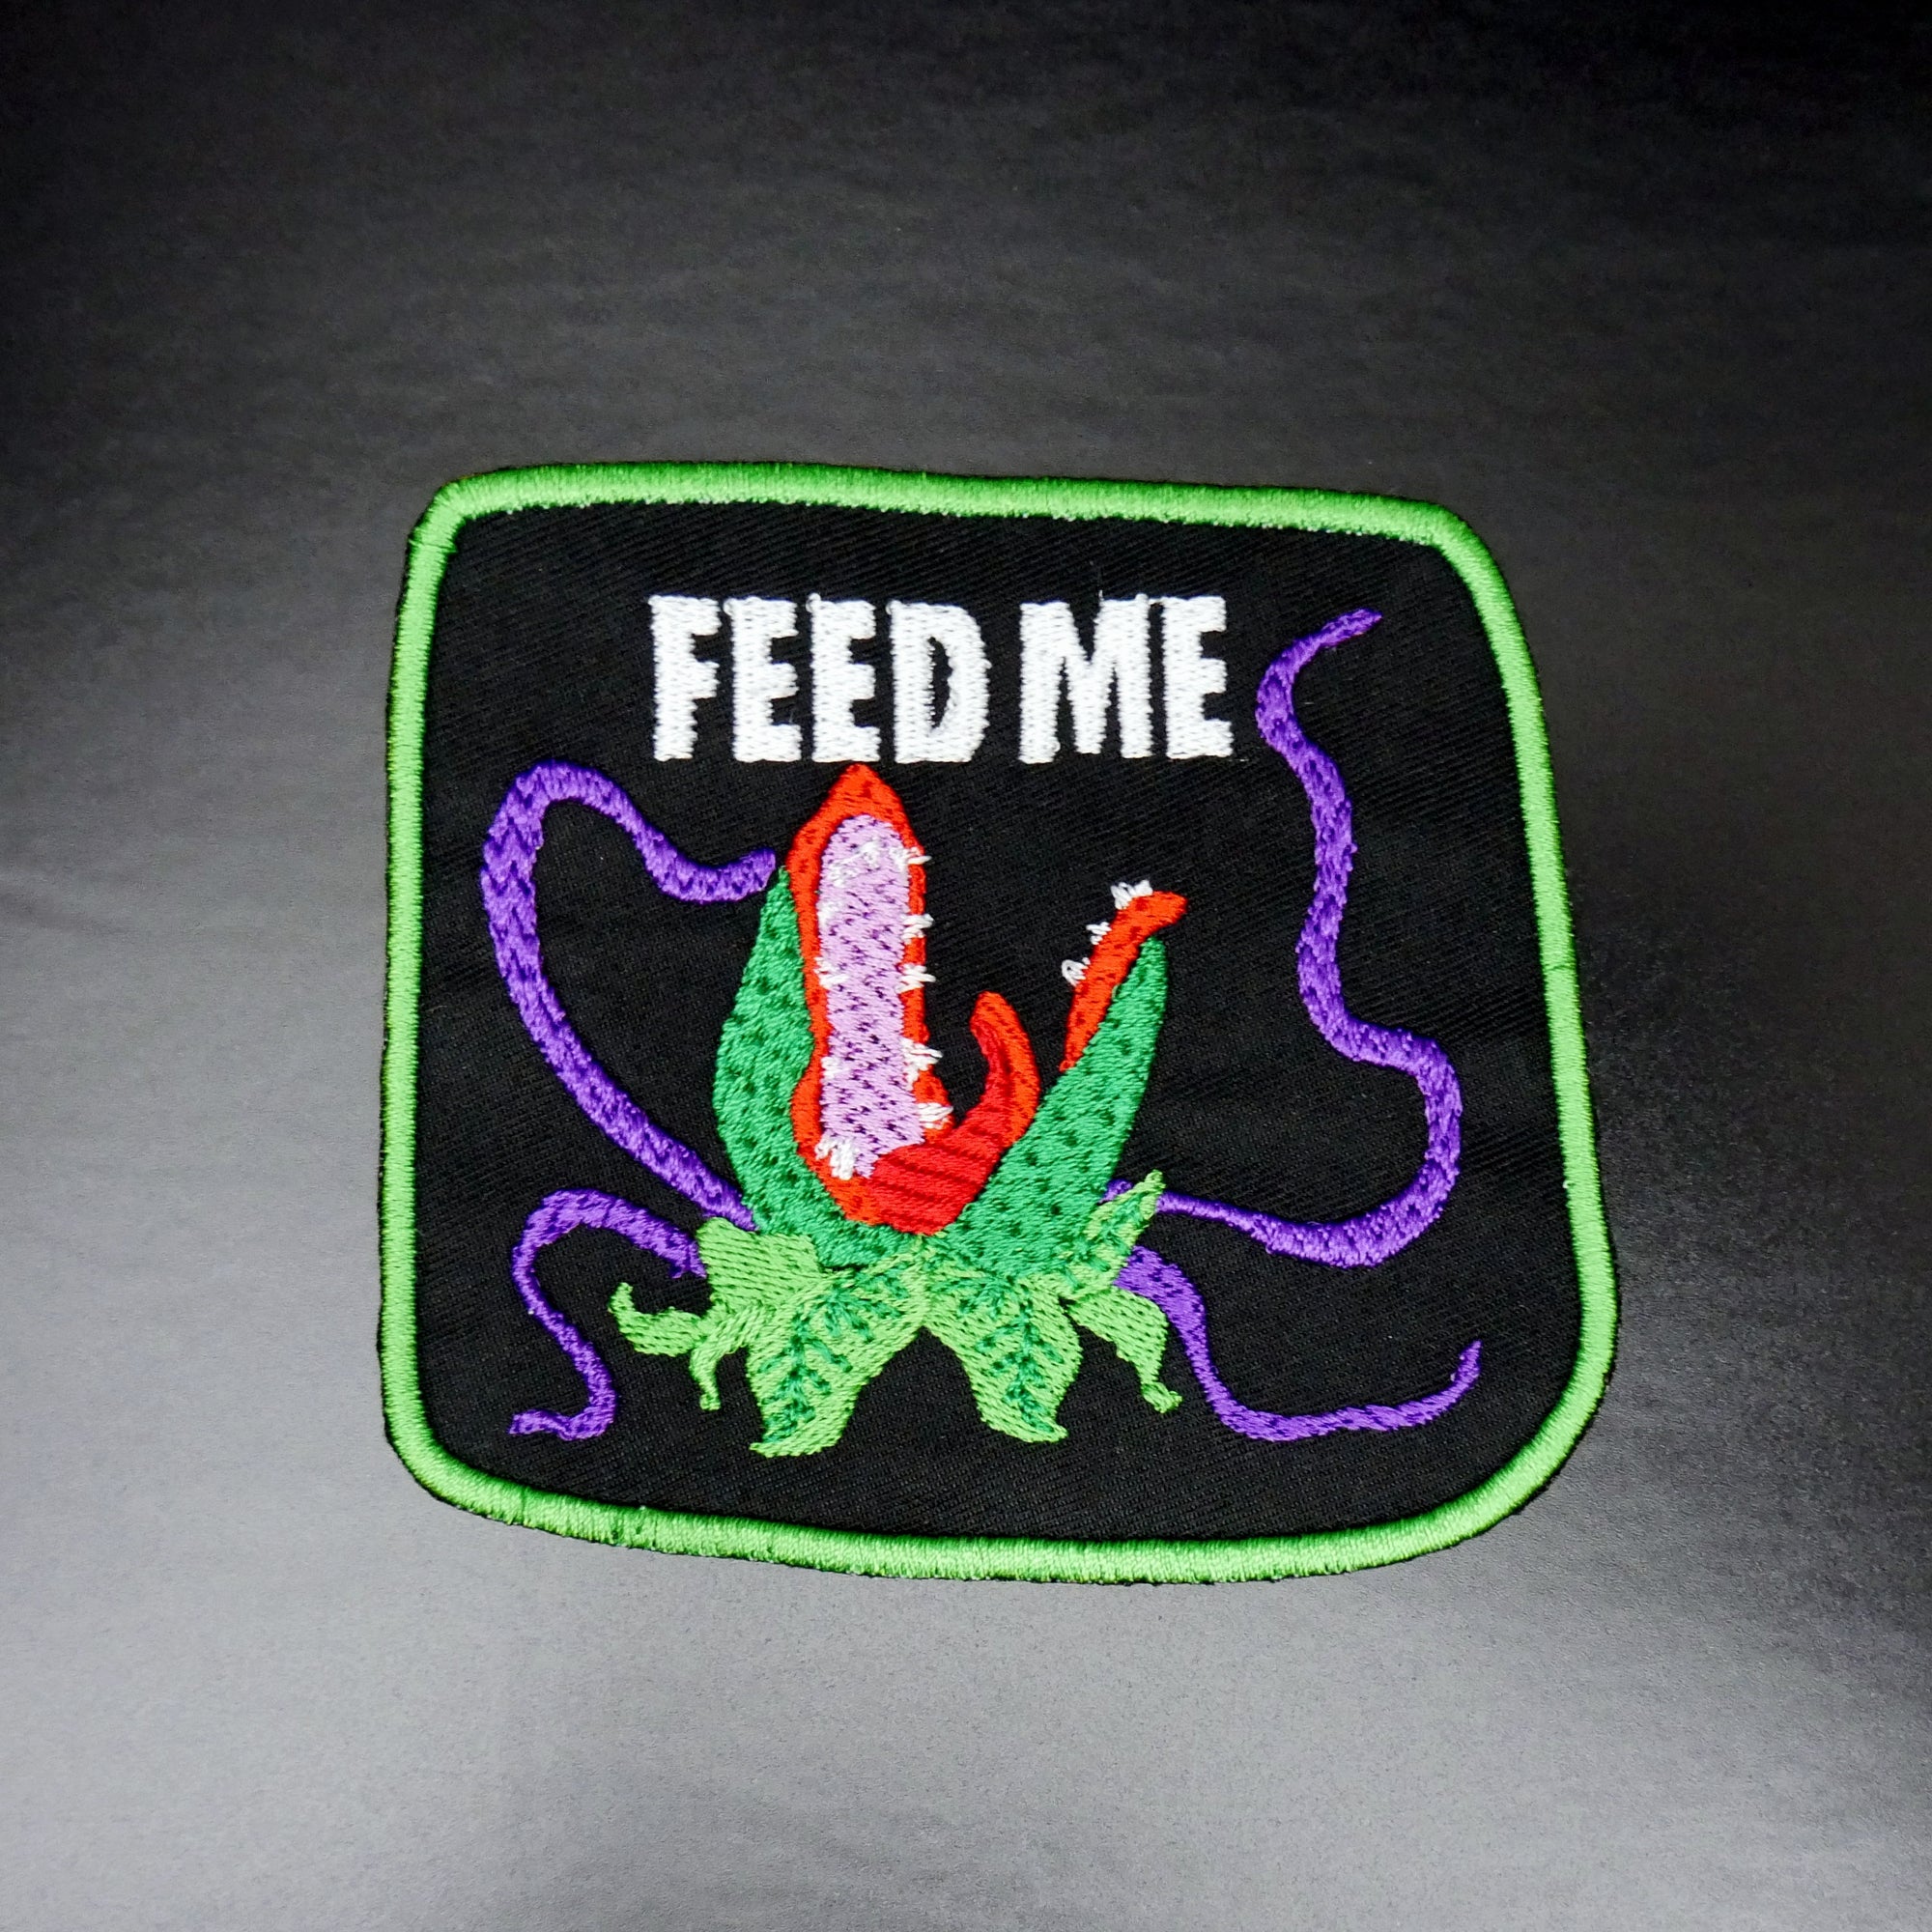 Feed Me Seymour Audrey 2 Patch